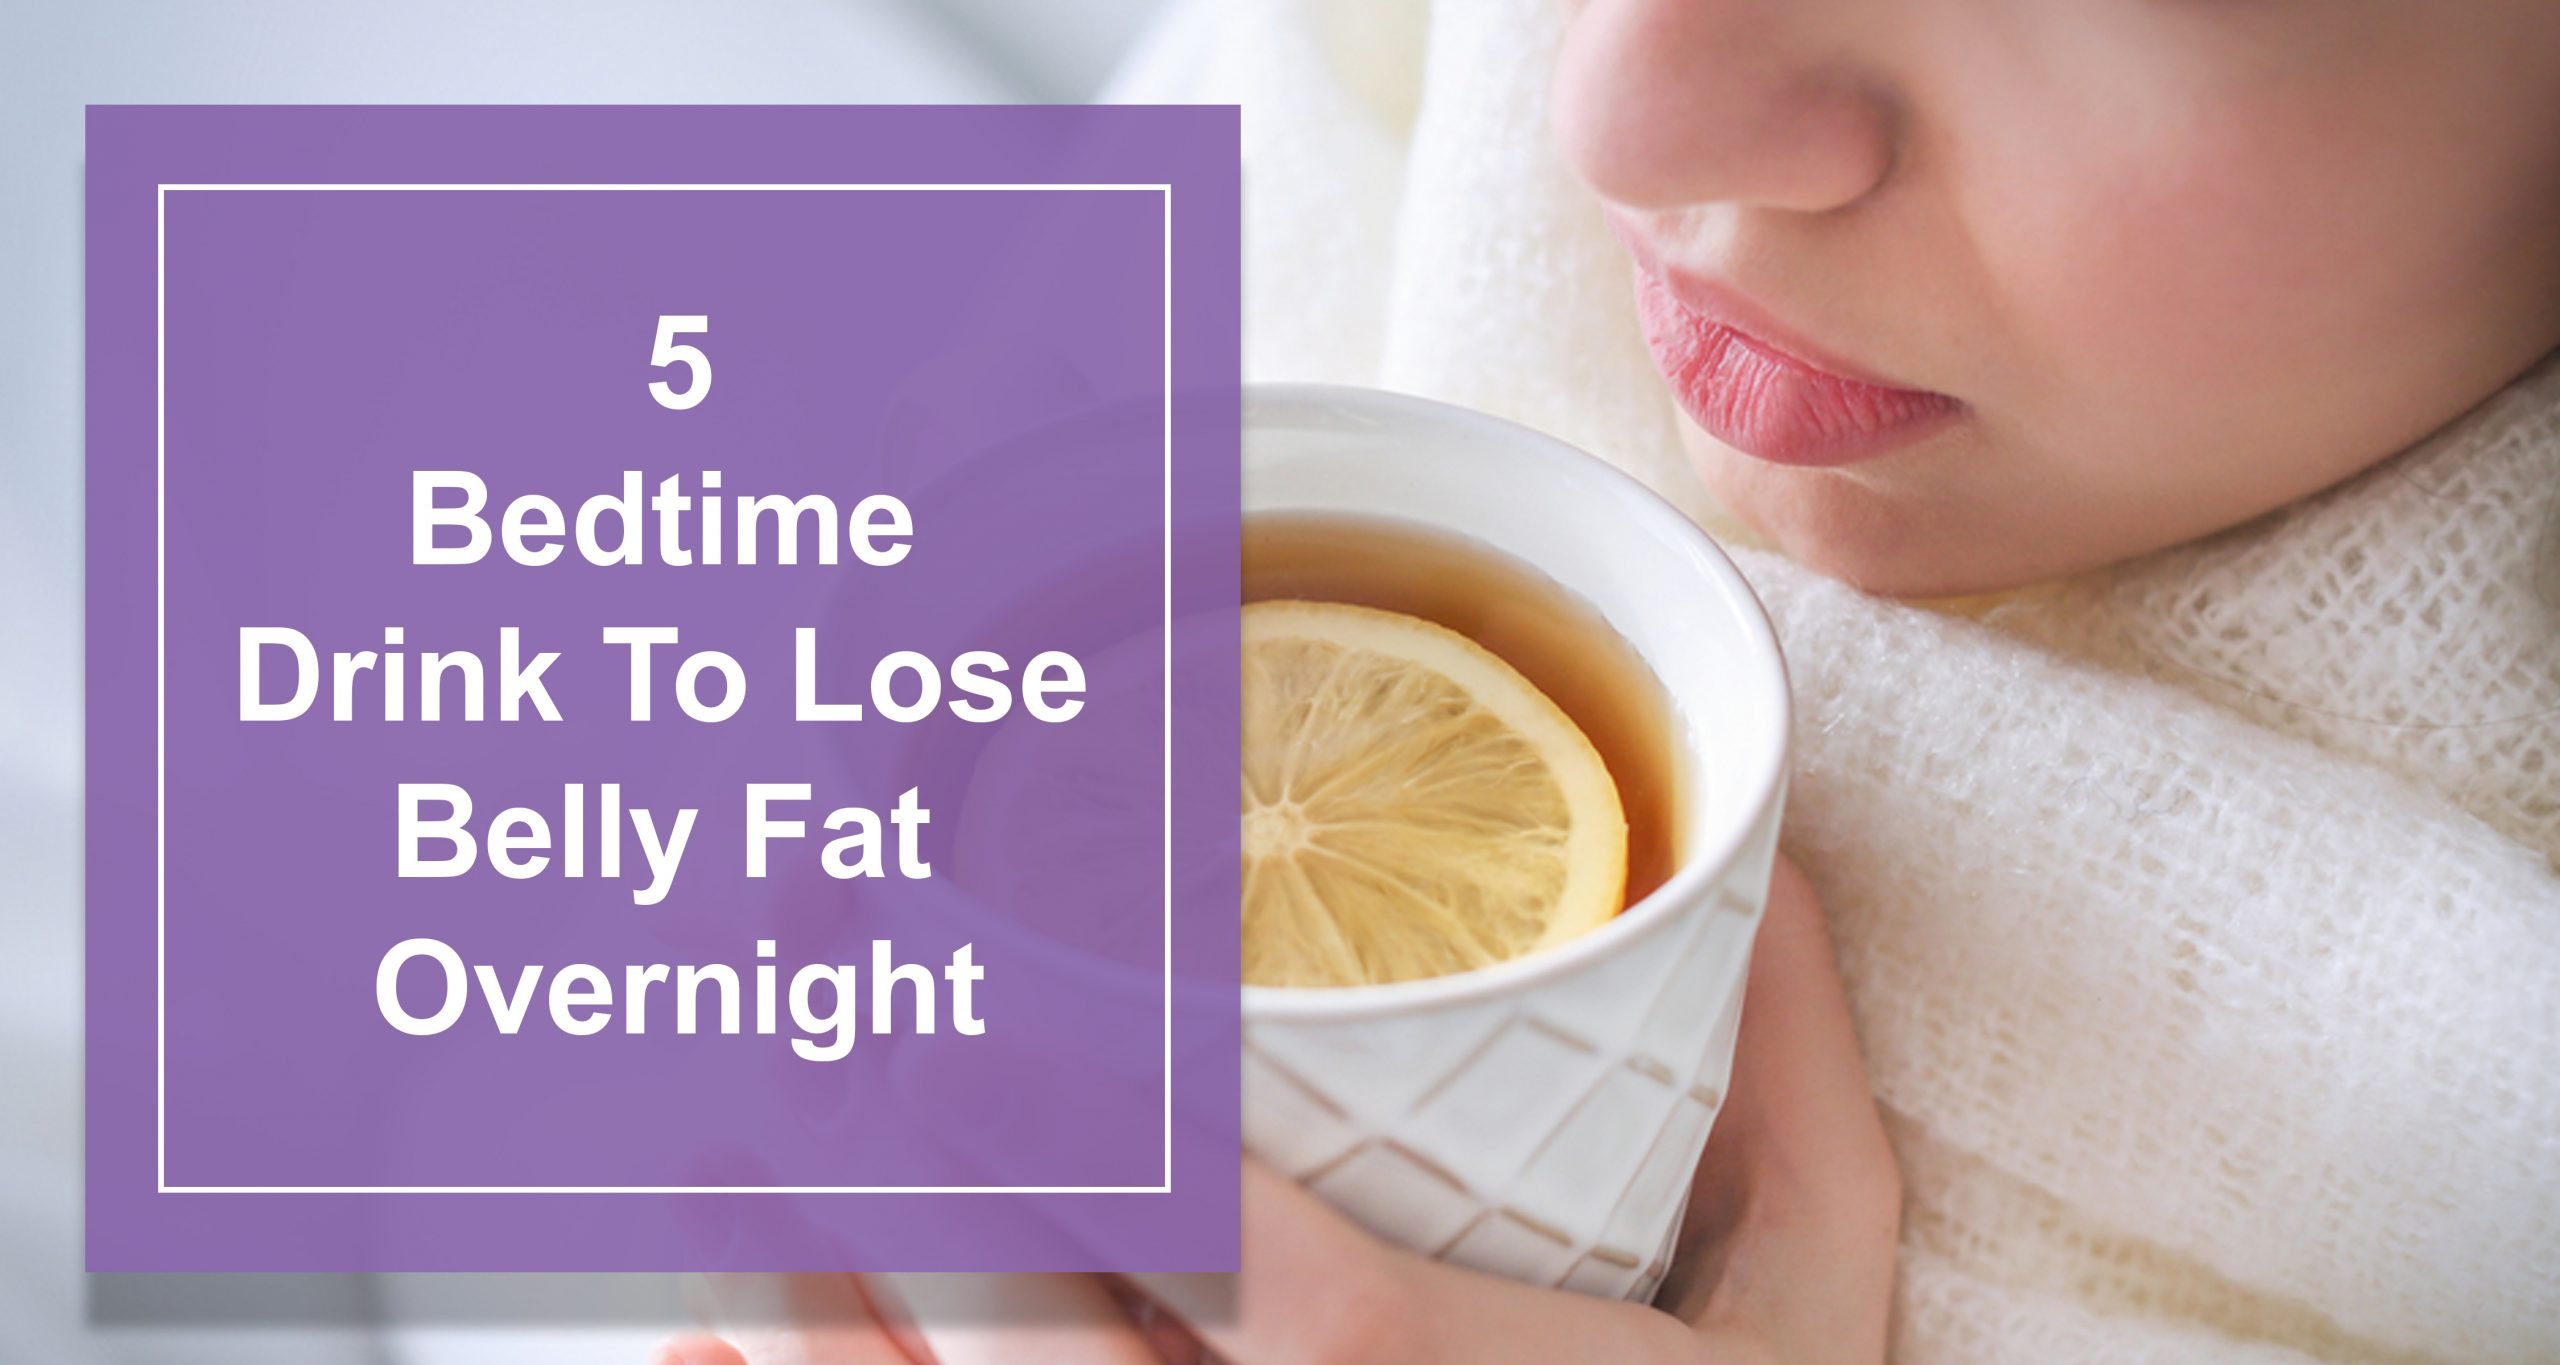 5 Bedtime Drink To Lose Belly Fat Overnight